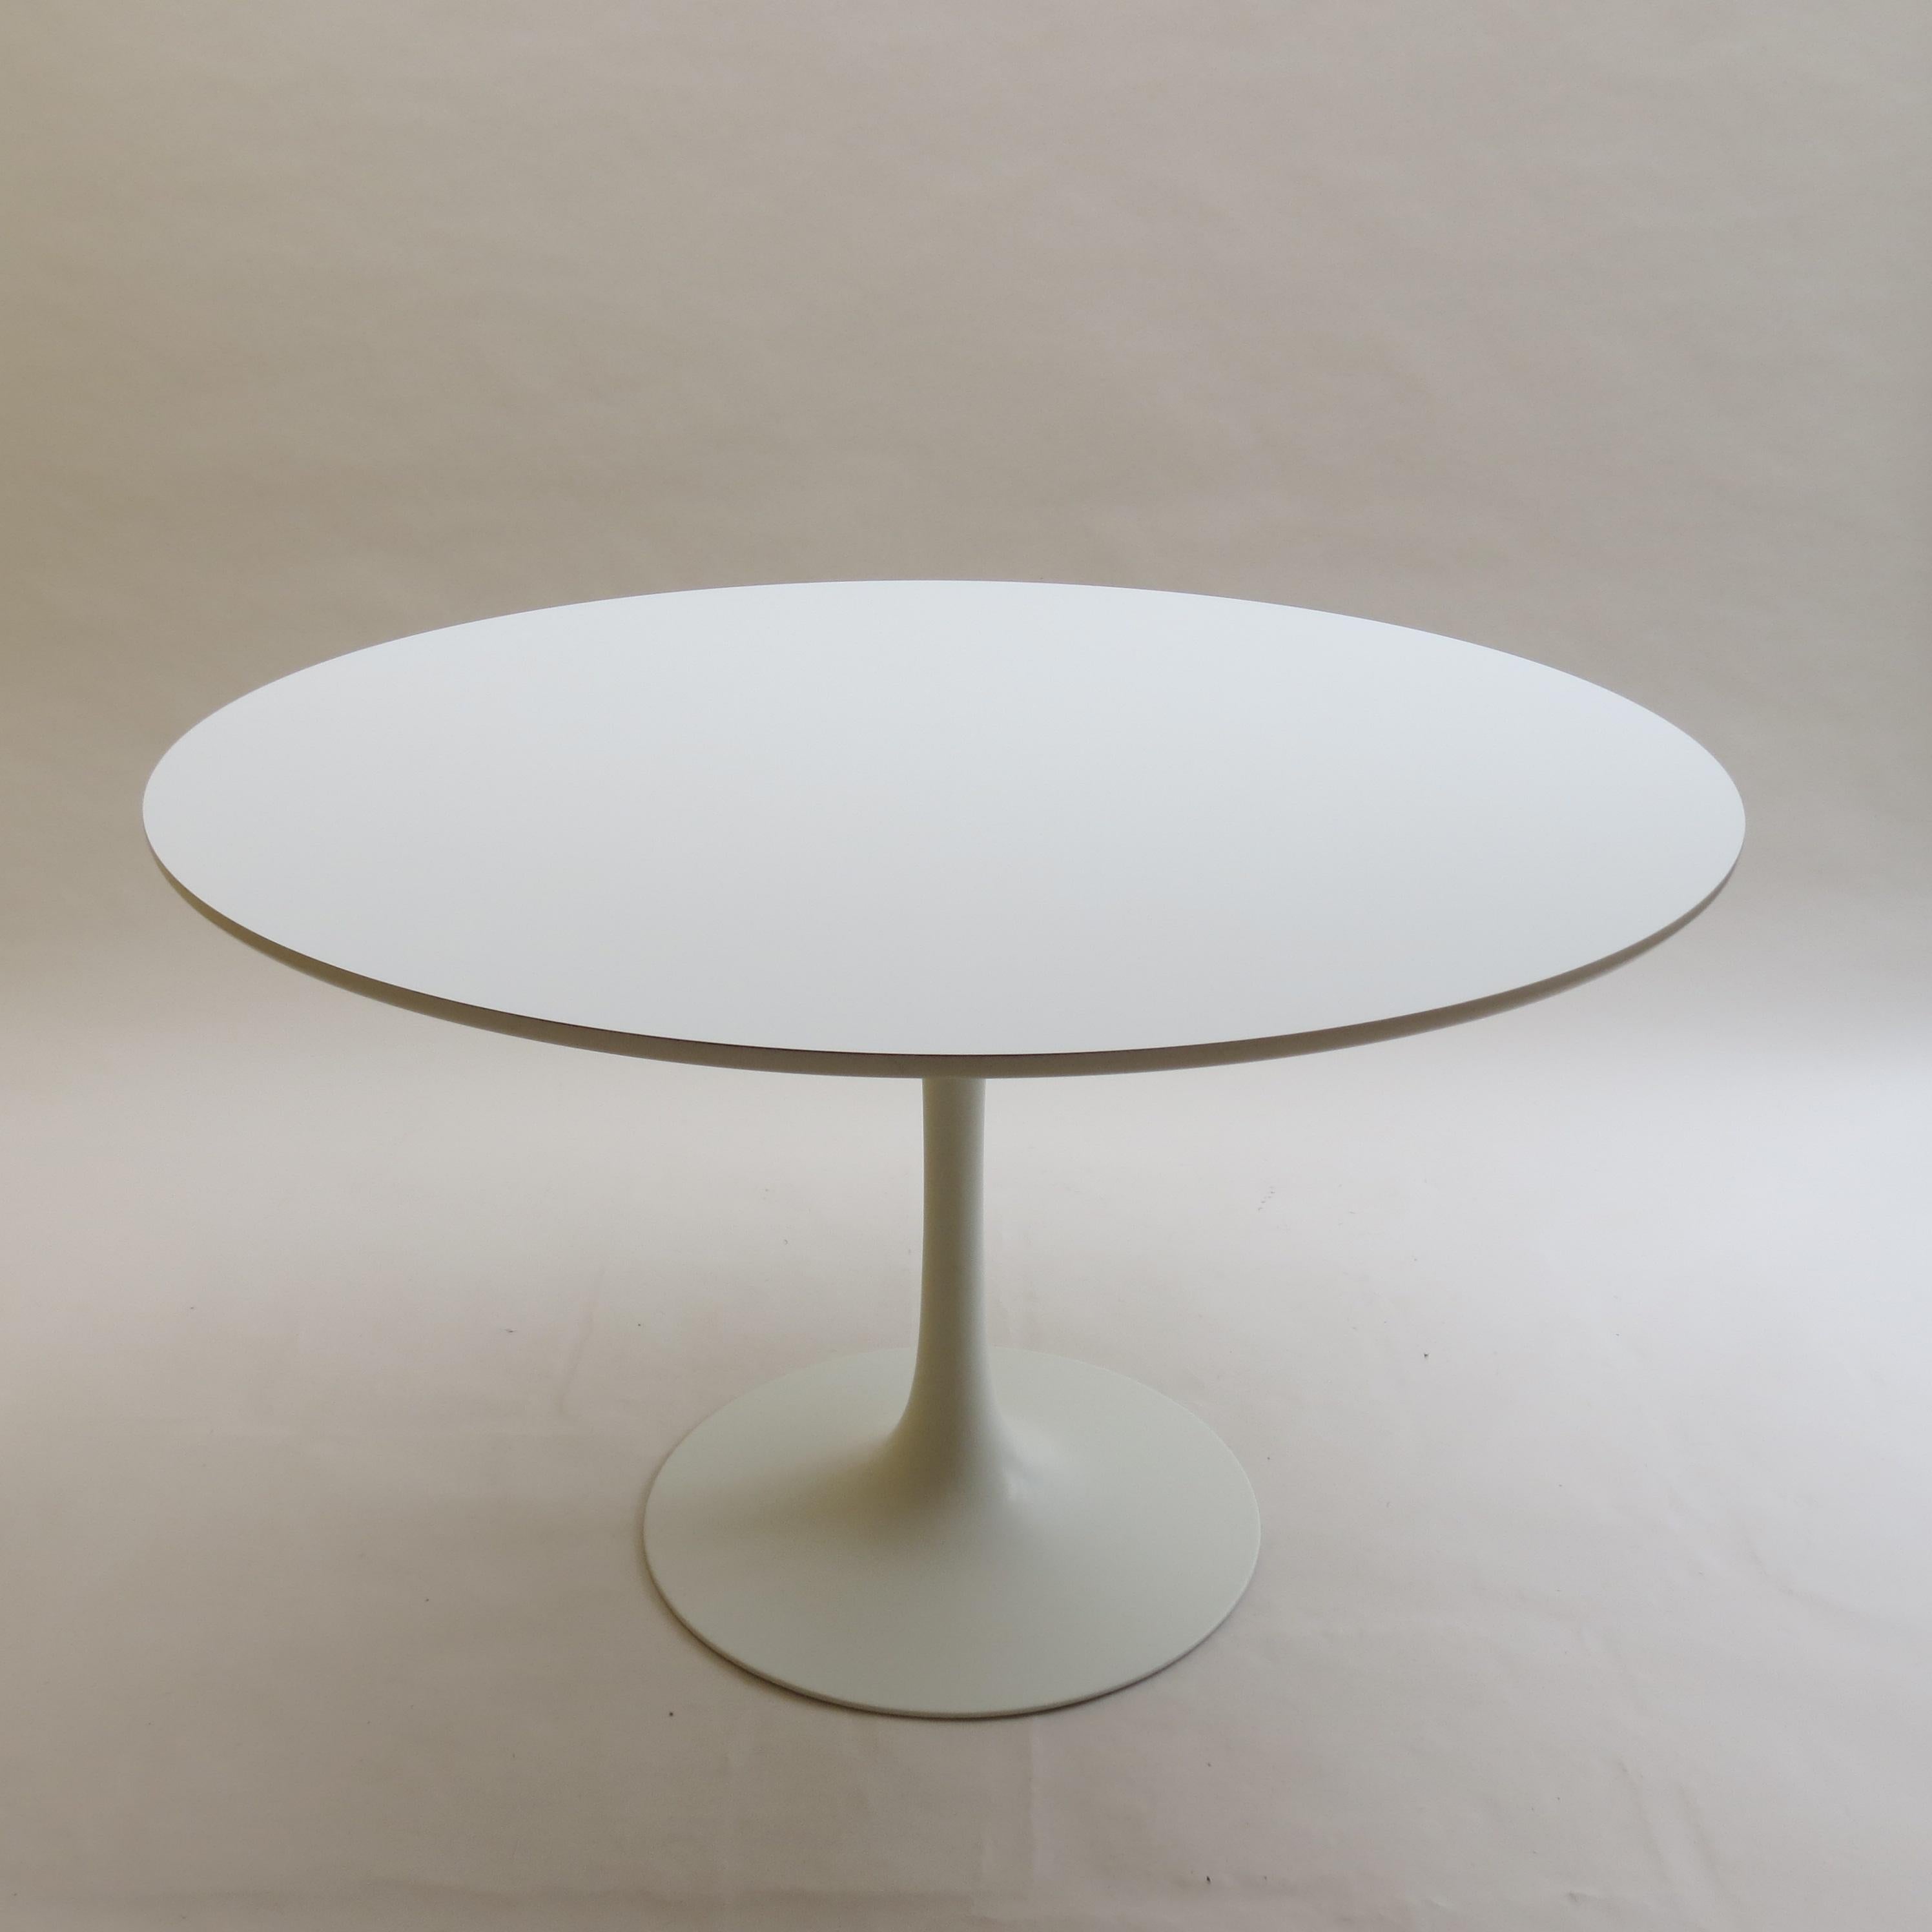 1960s white Tulip dining table by Maurice Burke for Arkana UK

White Tulip dining table, manufactured by Arkana, Bath UK and designed by Maurice Burke in the 1960s.

Painted cast aluminium base and formica top.

In good vintage condition,